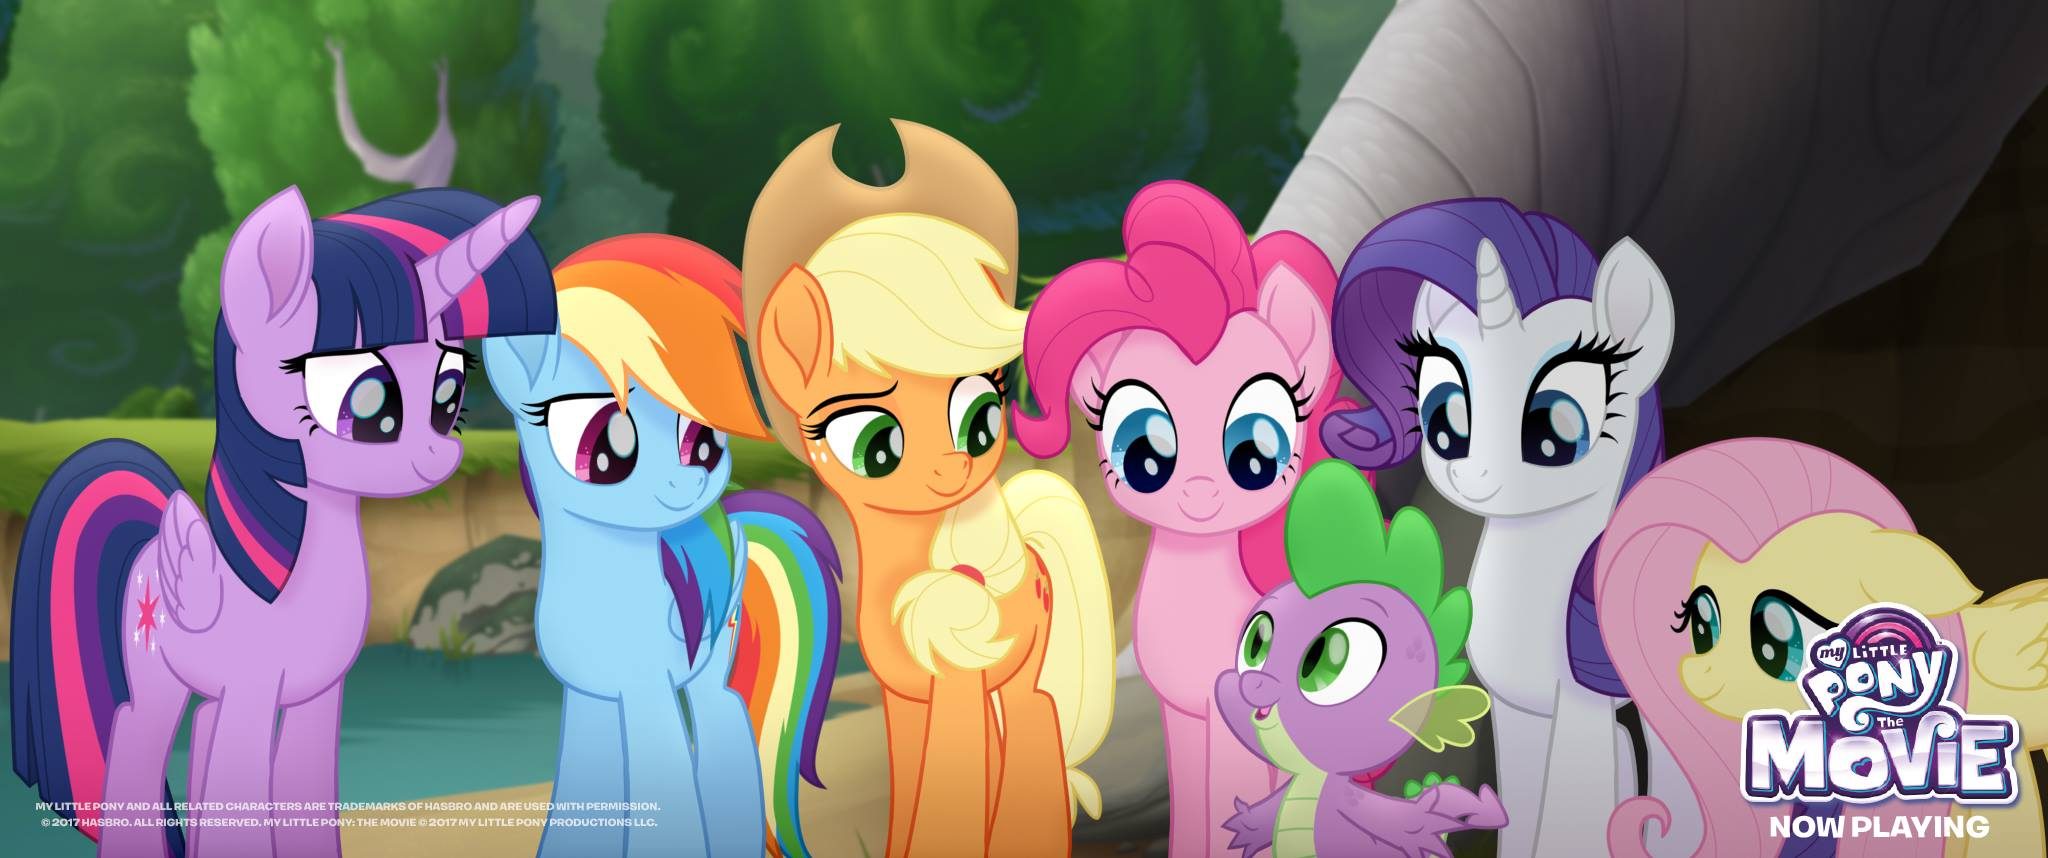 Photo from My Little Pony the Movie Facebook page  